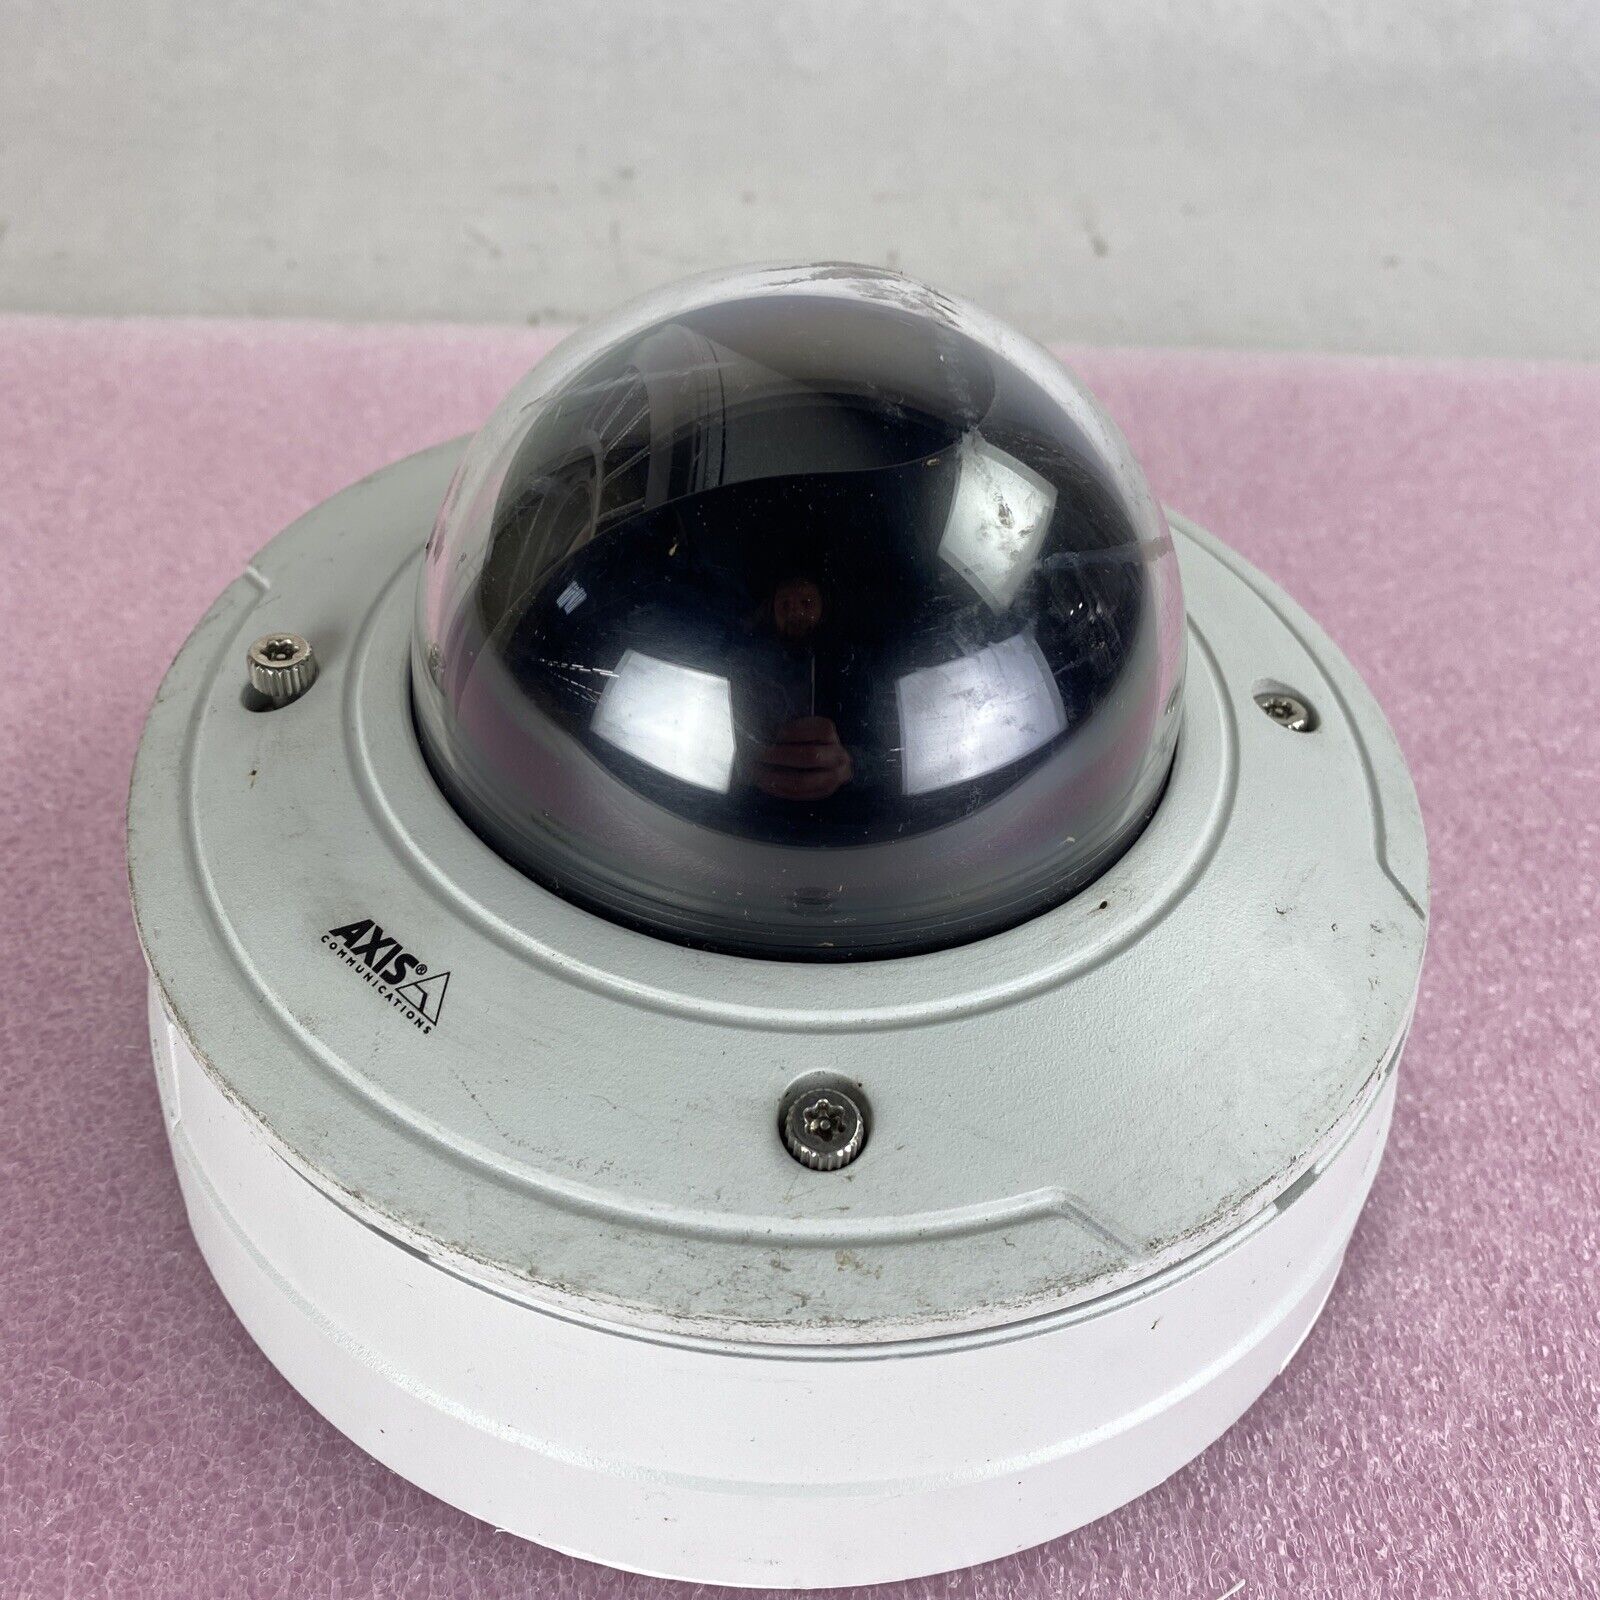 AXIS 0382-001-03 Vandal resistant P3343-VE 6MM POE network security camera